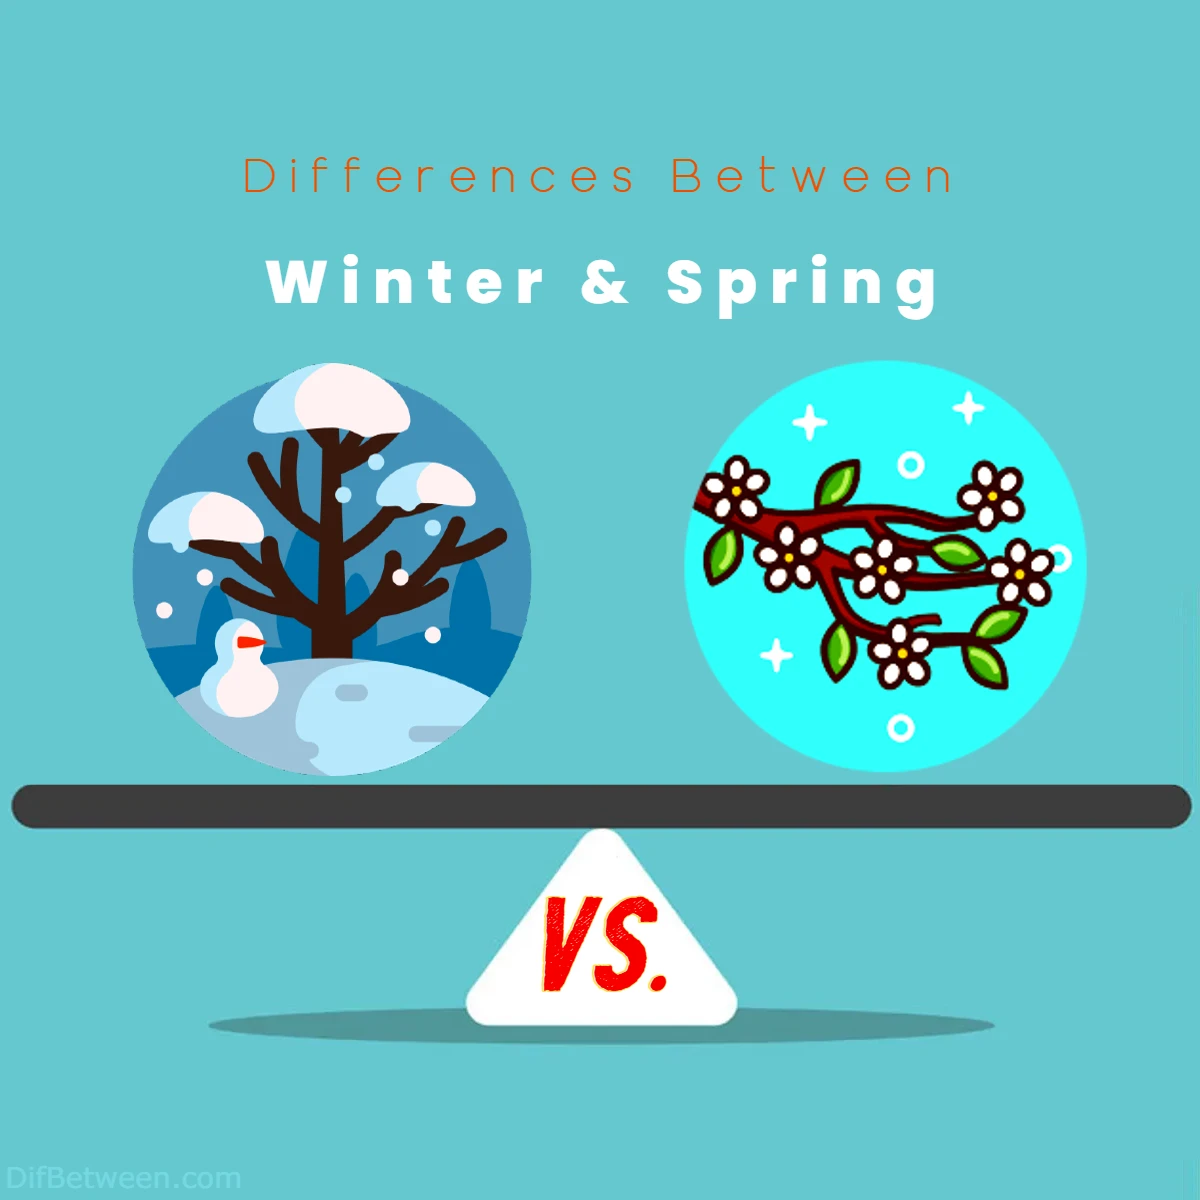 Differences Between Winter vs Spring